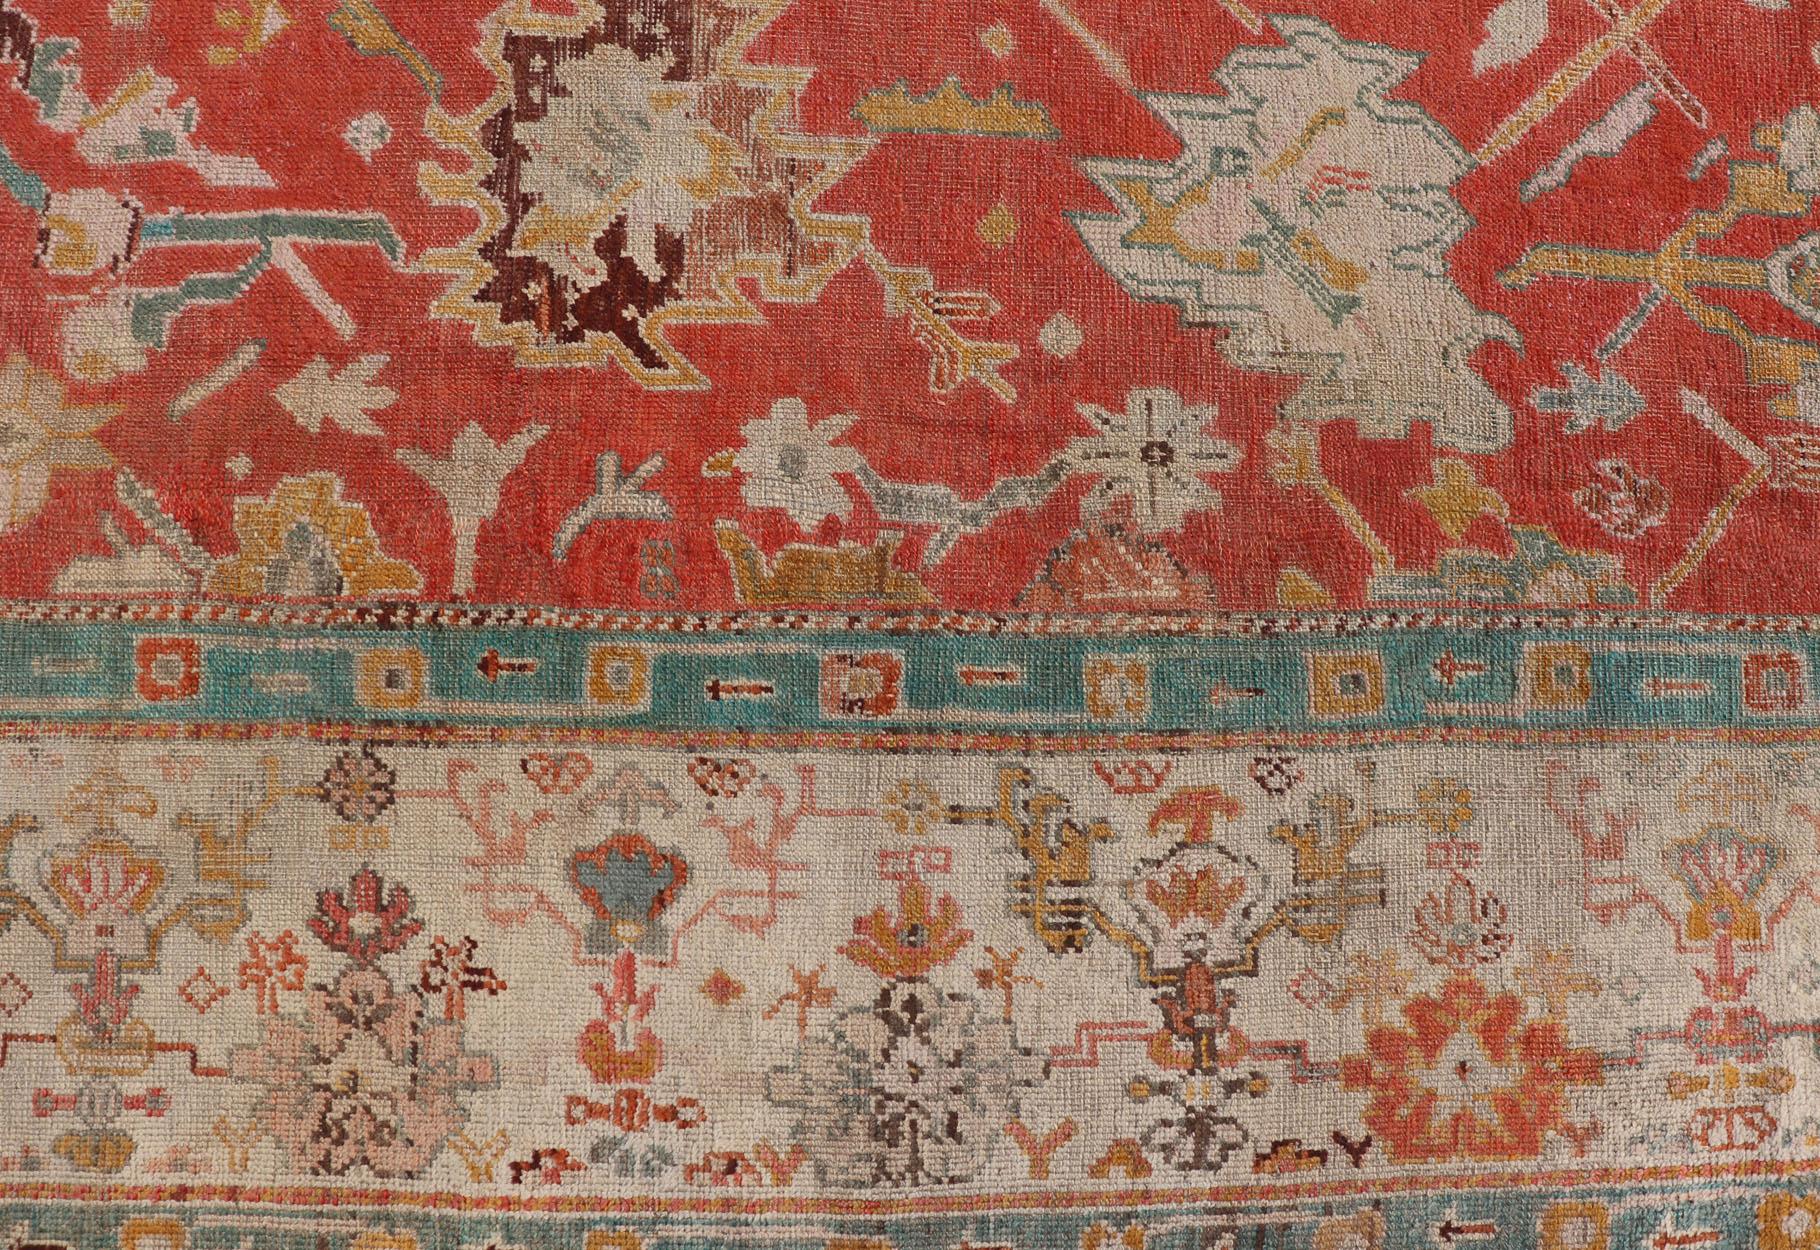 20th Century Antique Turkish Oushak In Tribal Motifs in Soft Coral, Blue, Marigold, and Cream For Sale